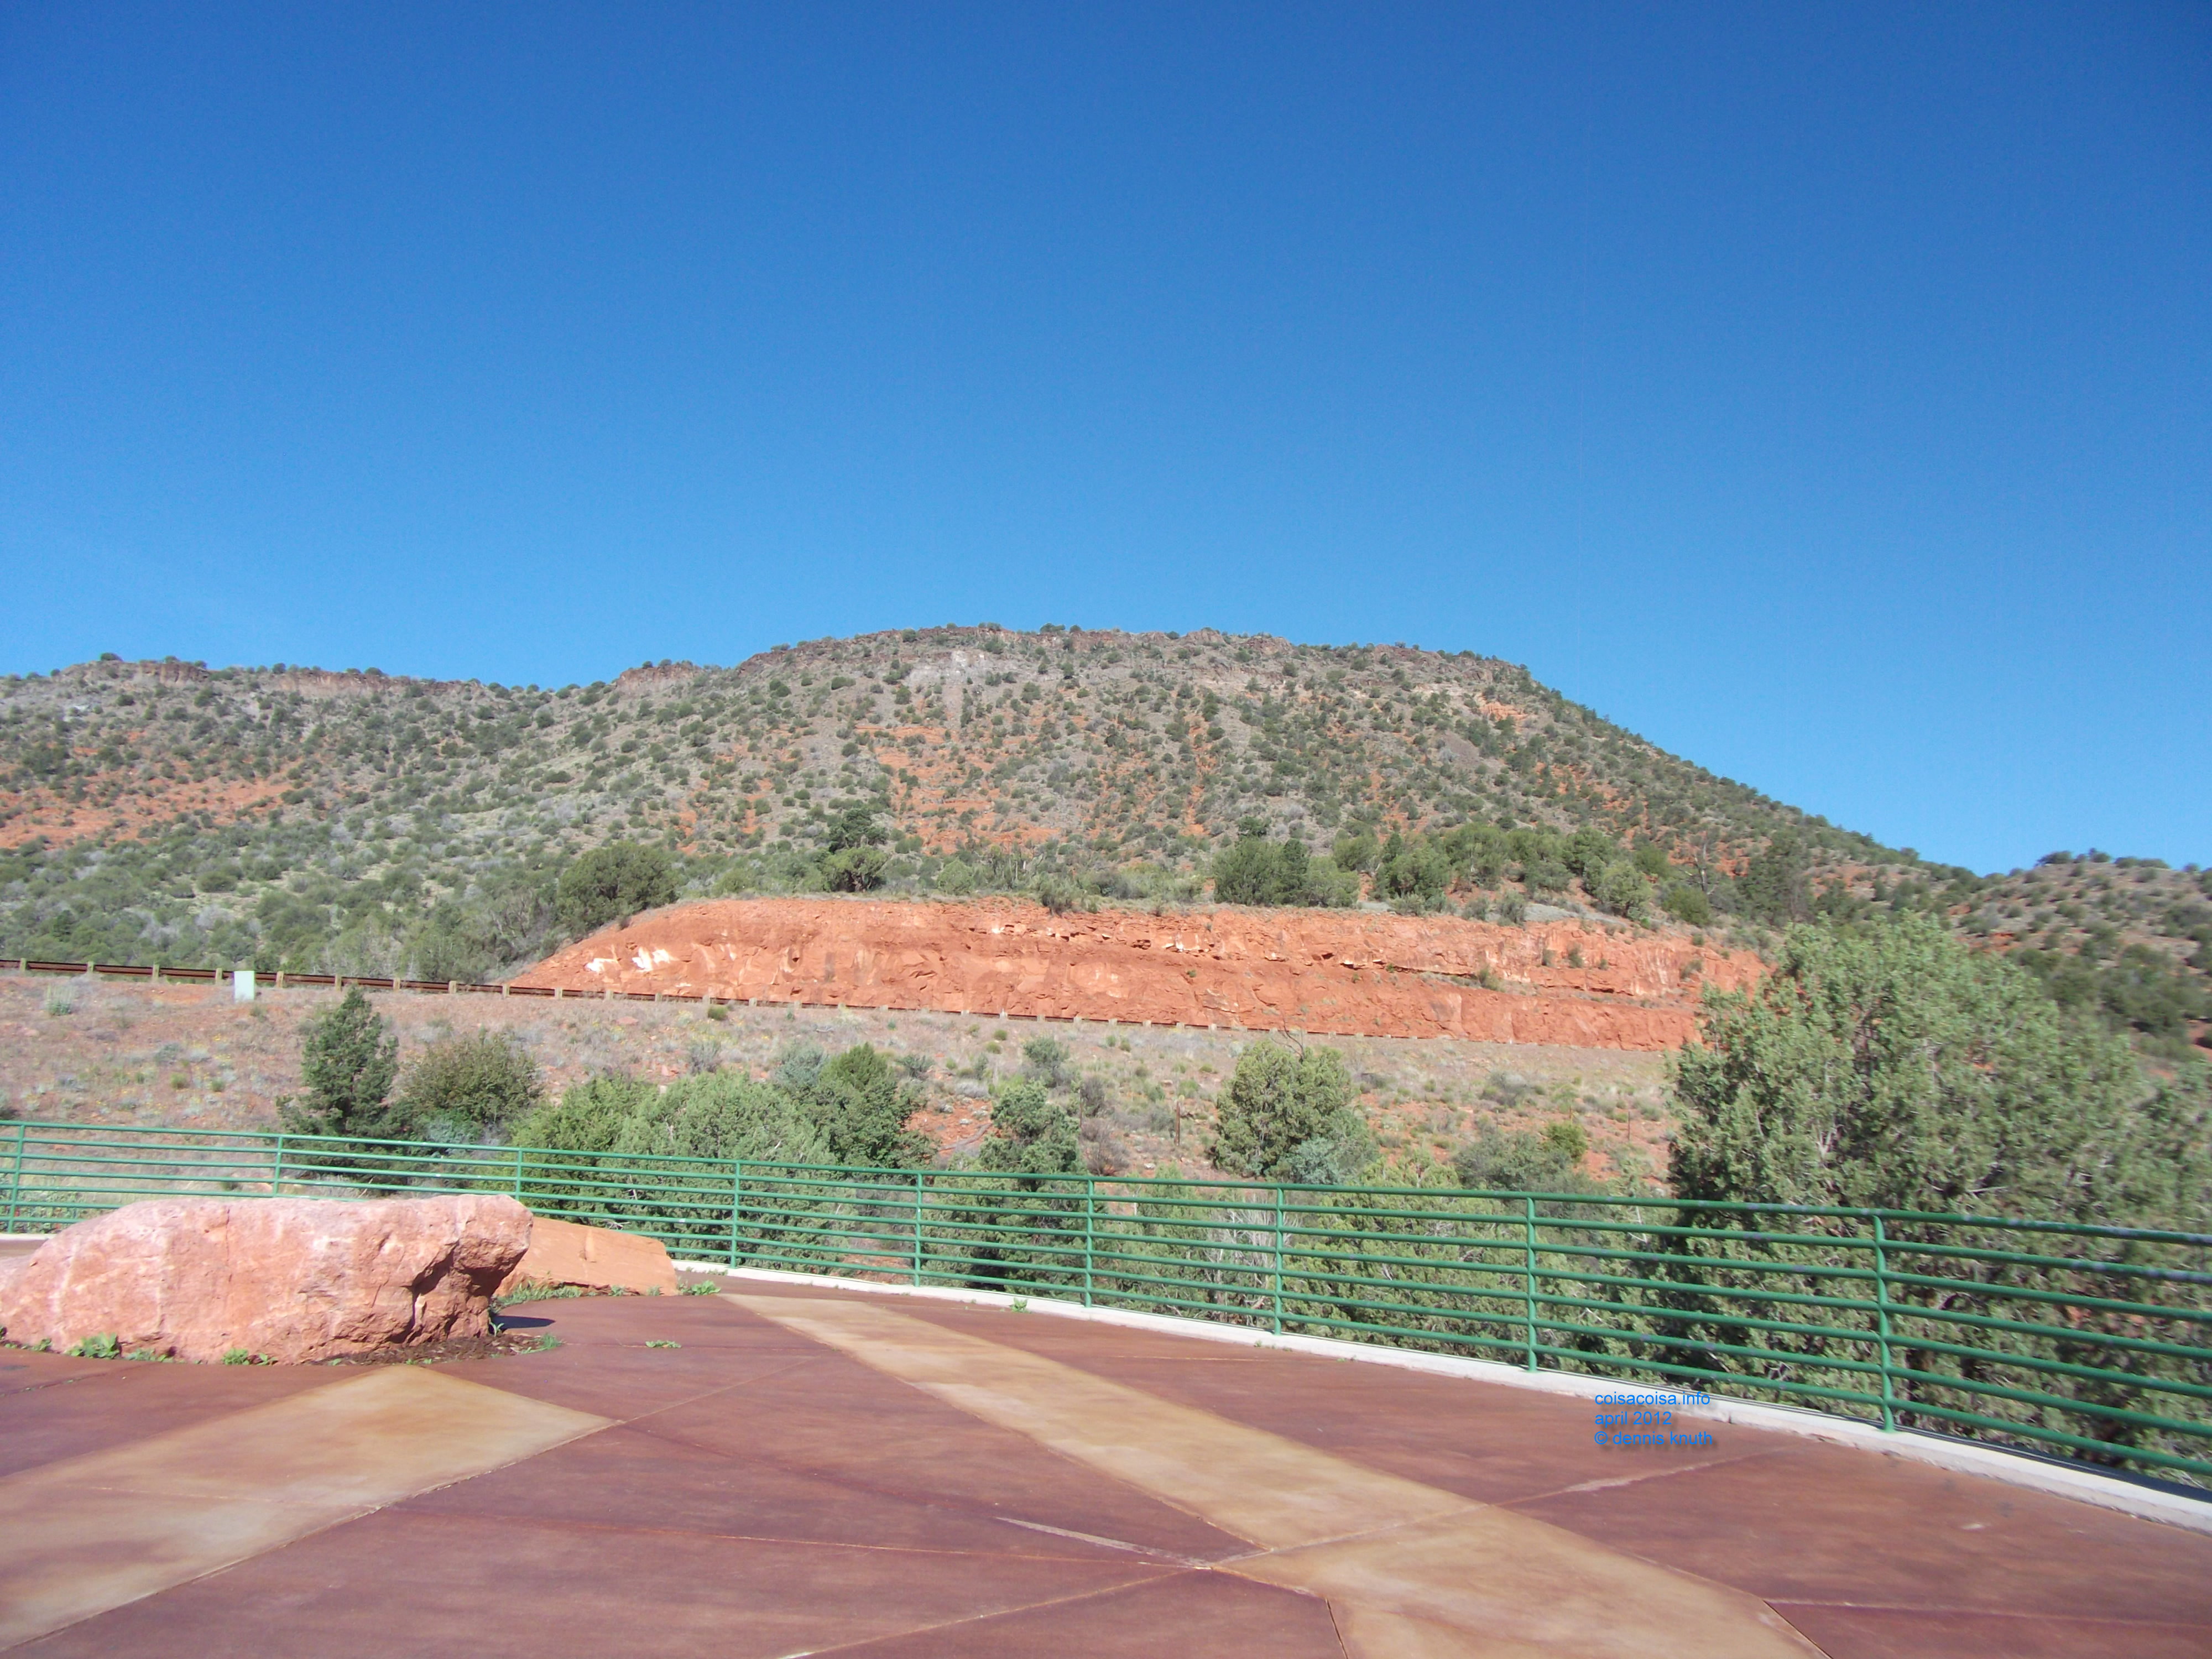 Walking on the paved walkway of the Sedona Visitor's Center